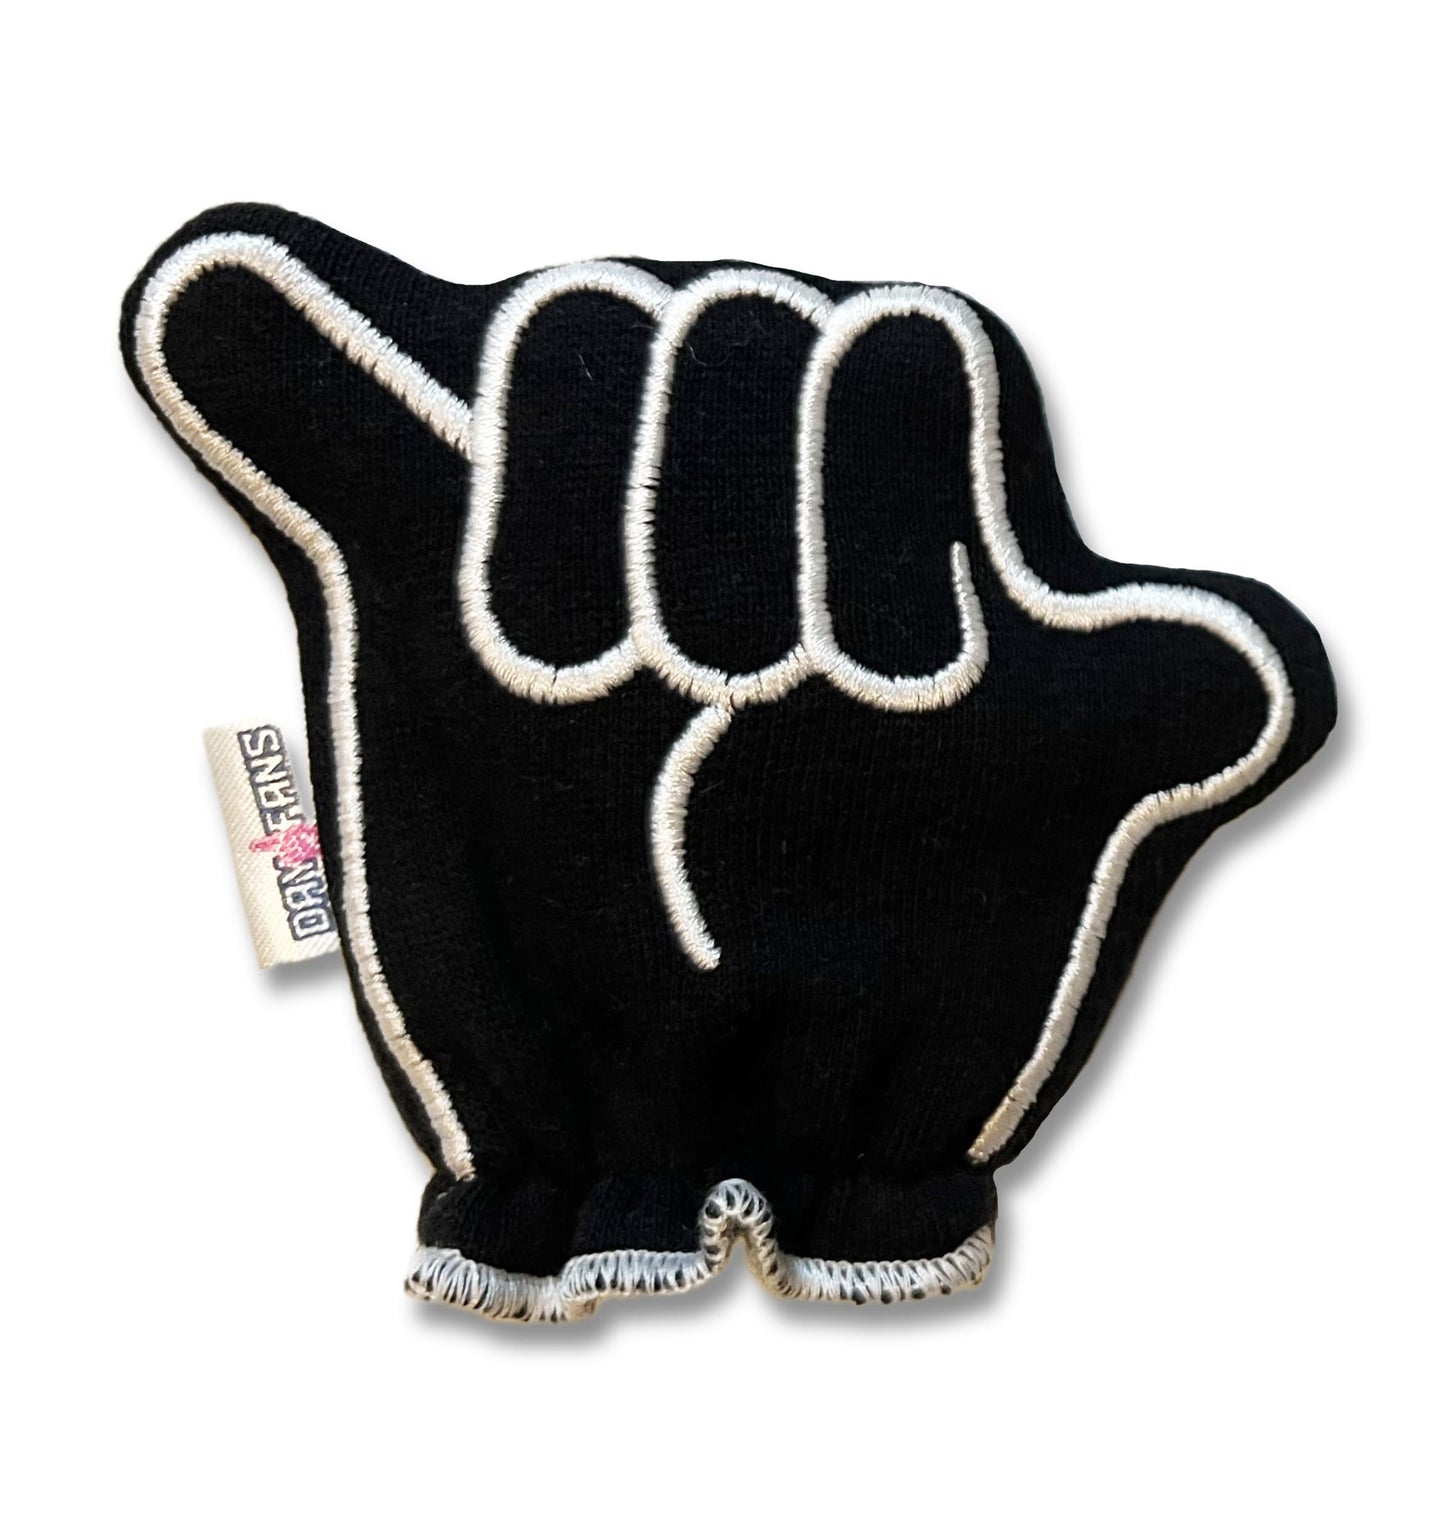 South Carolina Spurs Up FanMitts Baby Mittens Black Front